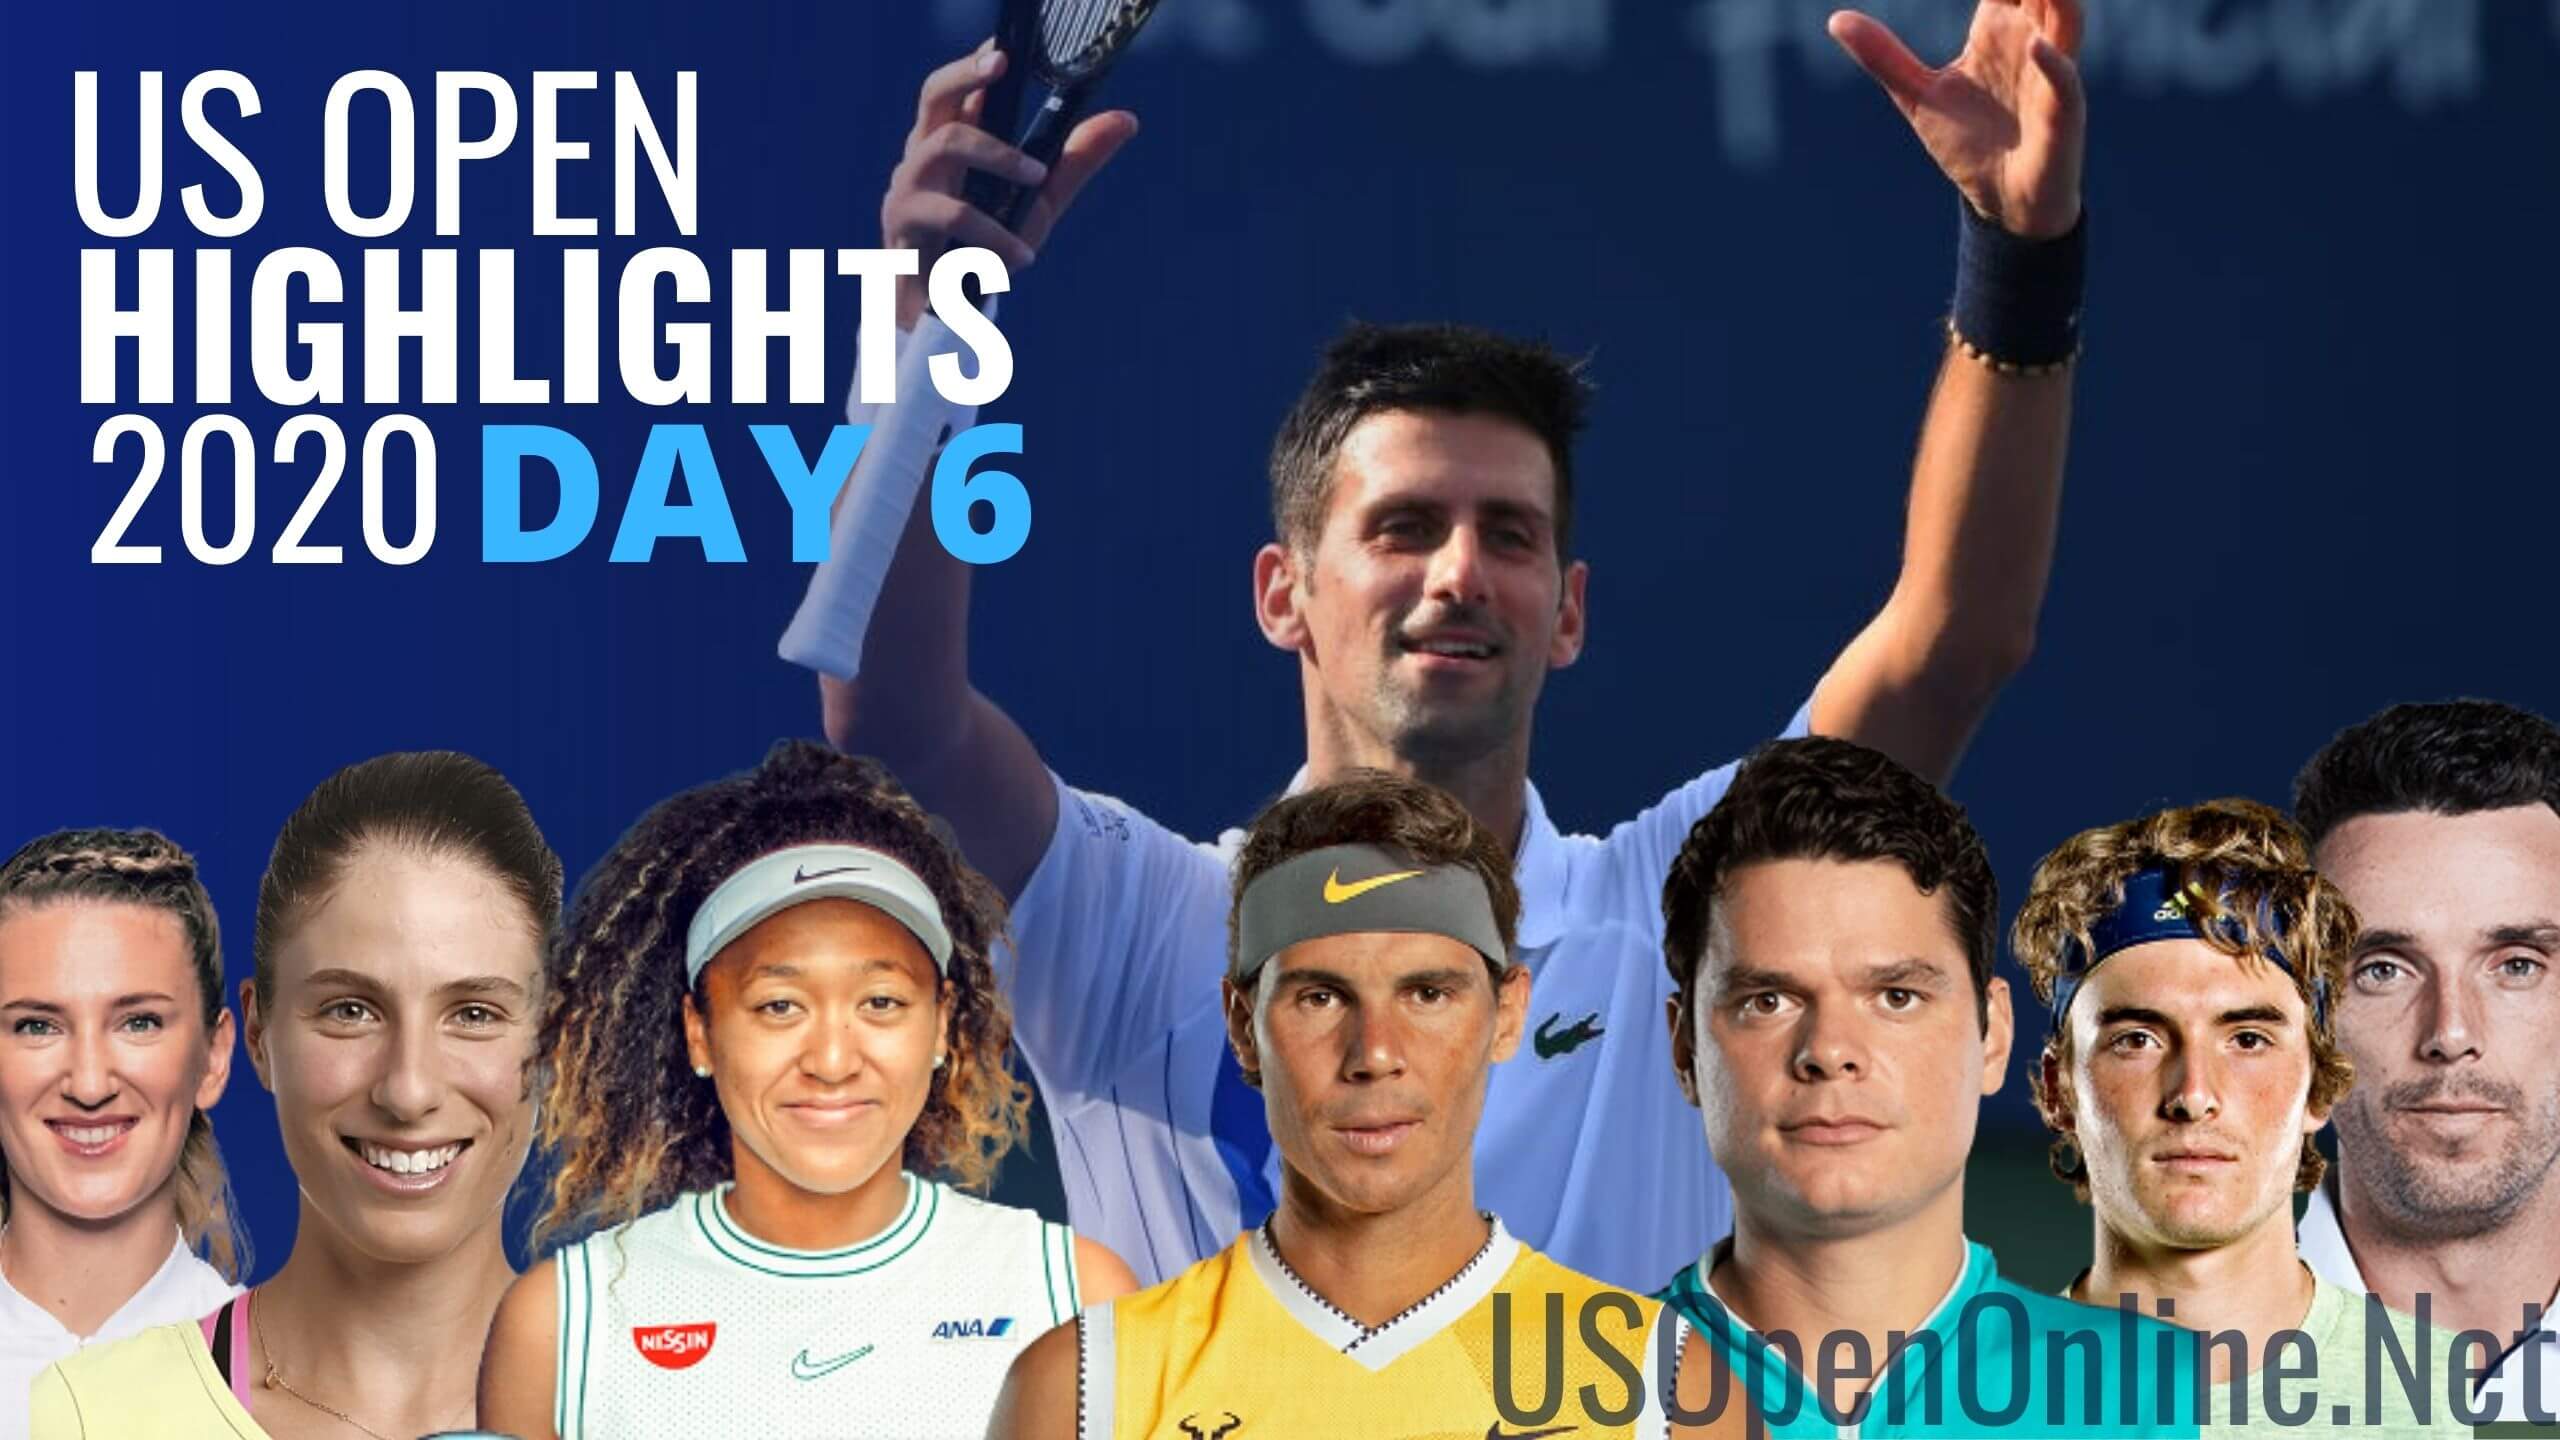 US Open Tennis 2020 Day 6 Complete Match Highlights